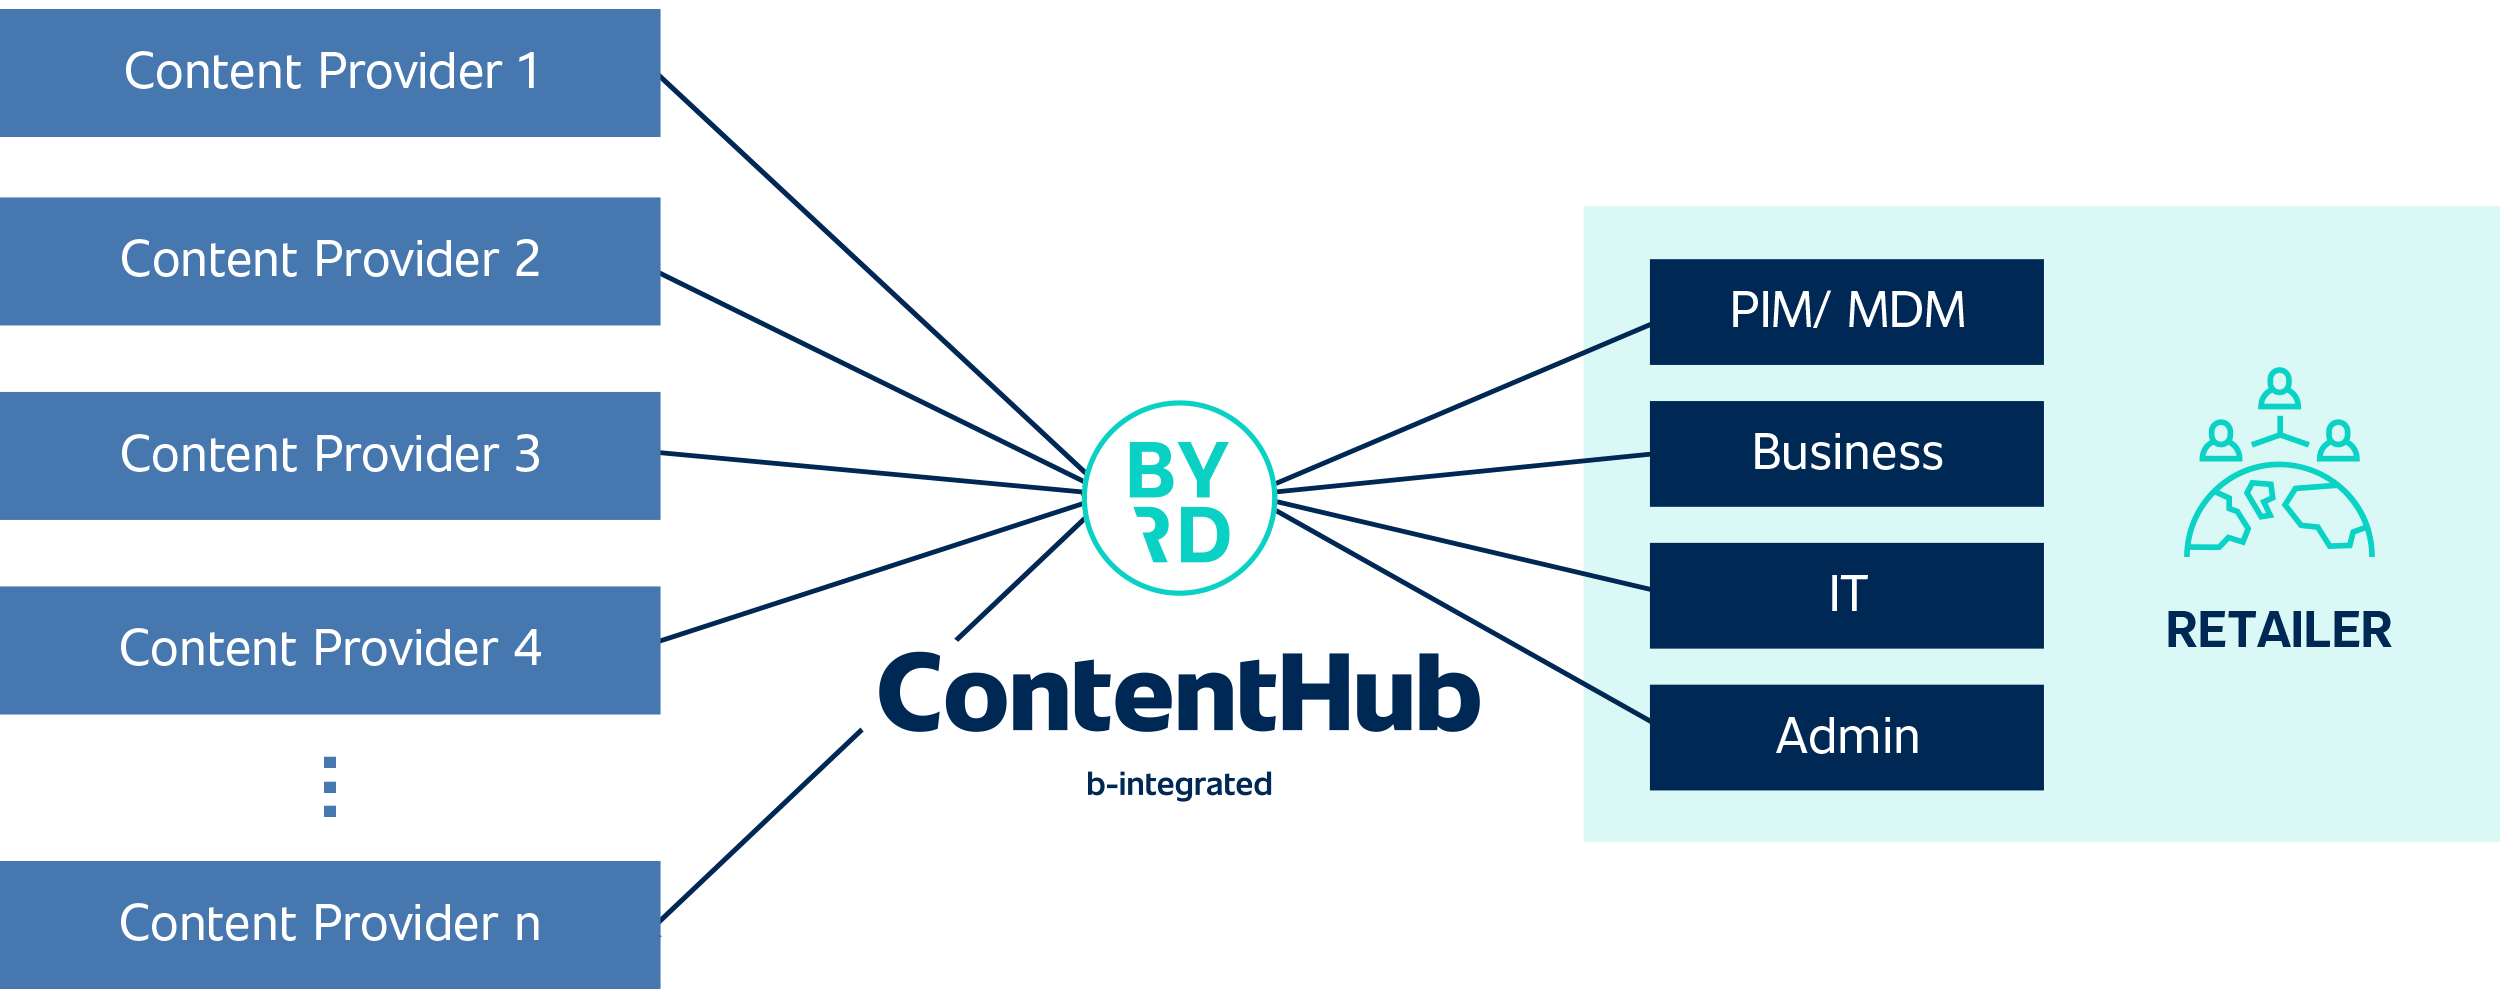 ContentHub – b-integrated